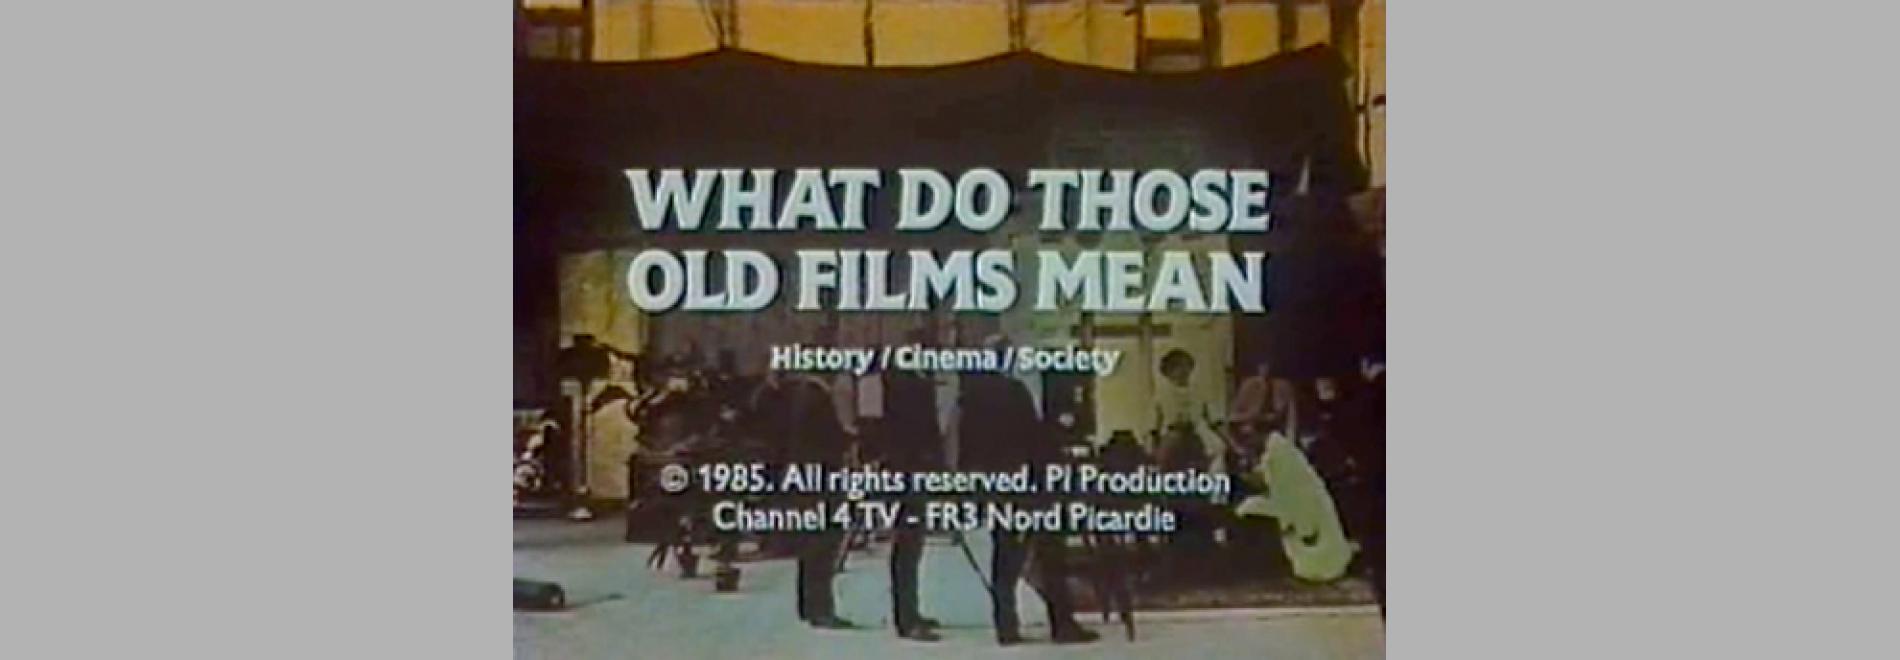 What do those old films mean